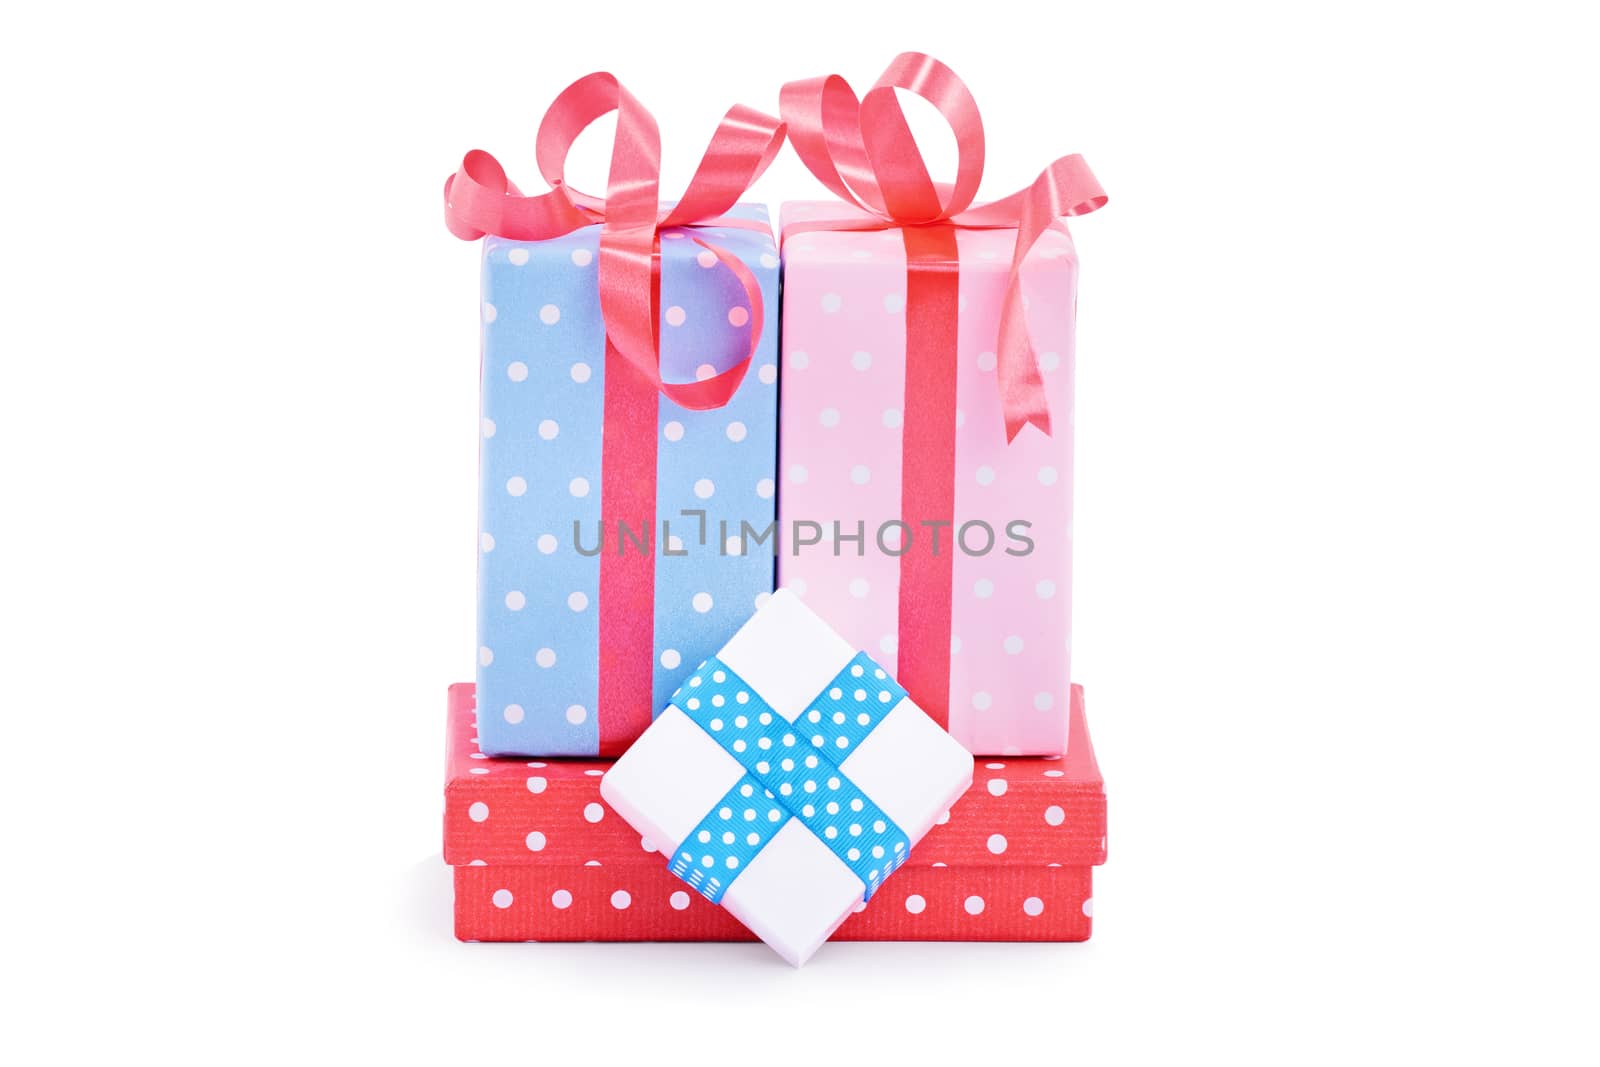 Pile of gifts wrapped in cute wrapping paper and ribbons by Mendelex